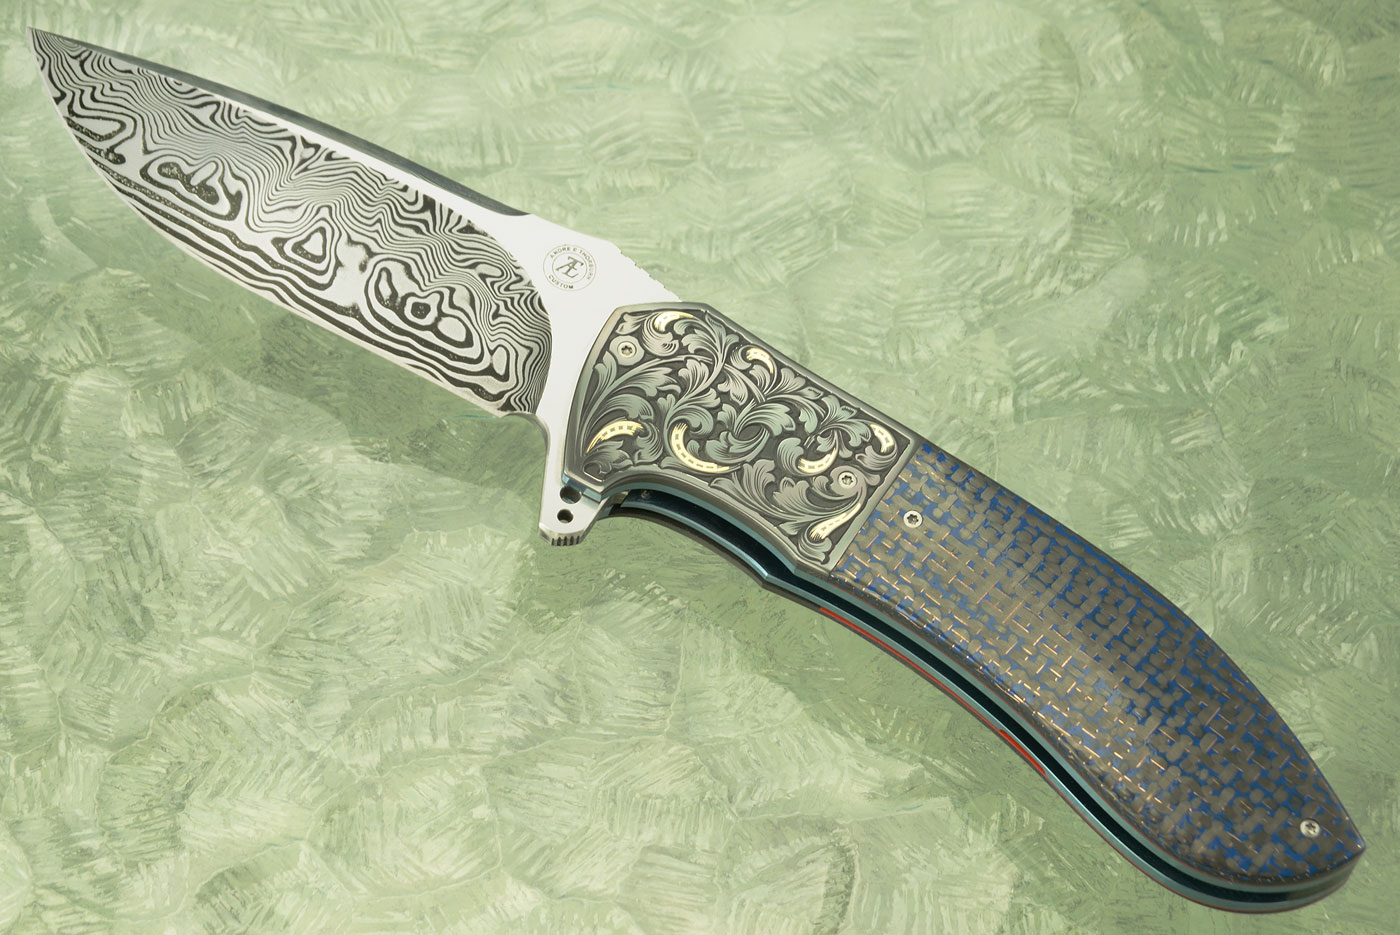 L50 Flipper with Damascus, Blue Lightning Strike Carbon Fiber, and Engraved Zirconium with Gold Inlay (Ceramic IKBS)